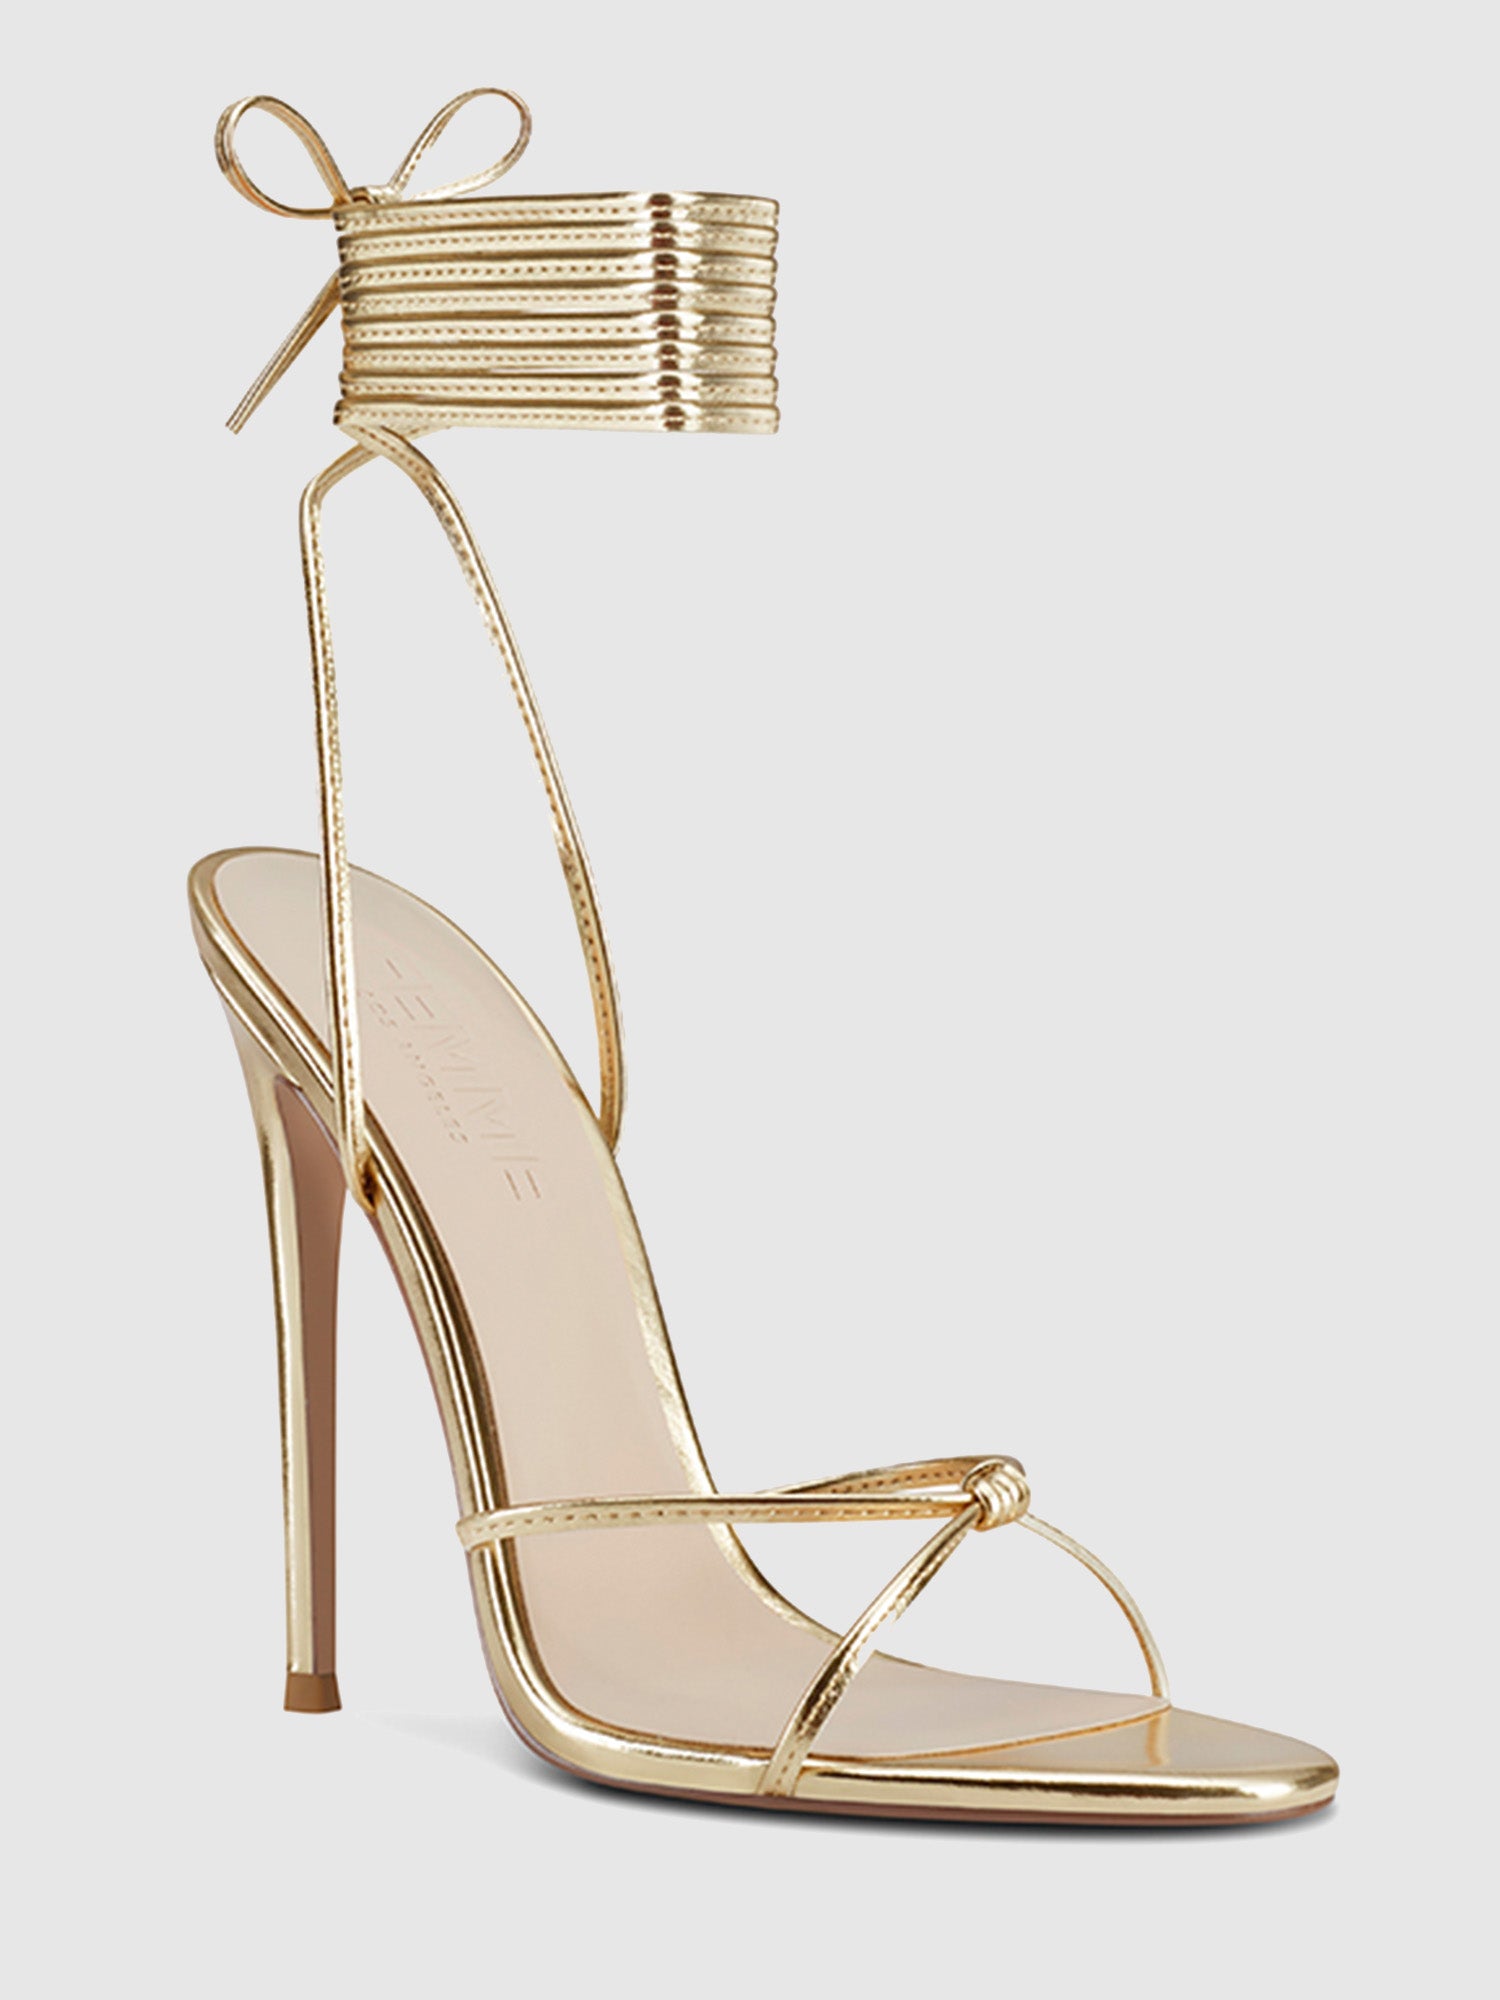 Gucci Metallic Gold Rope Sandals with Floral Detailing EU 37.5 – Sellier